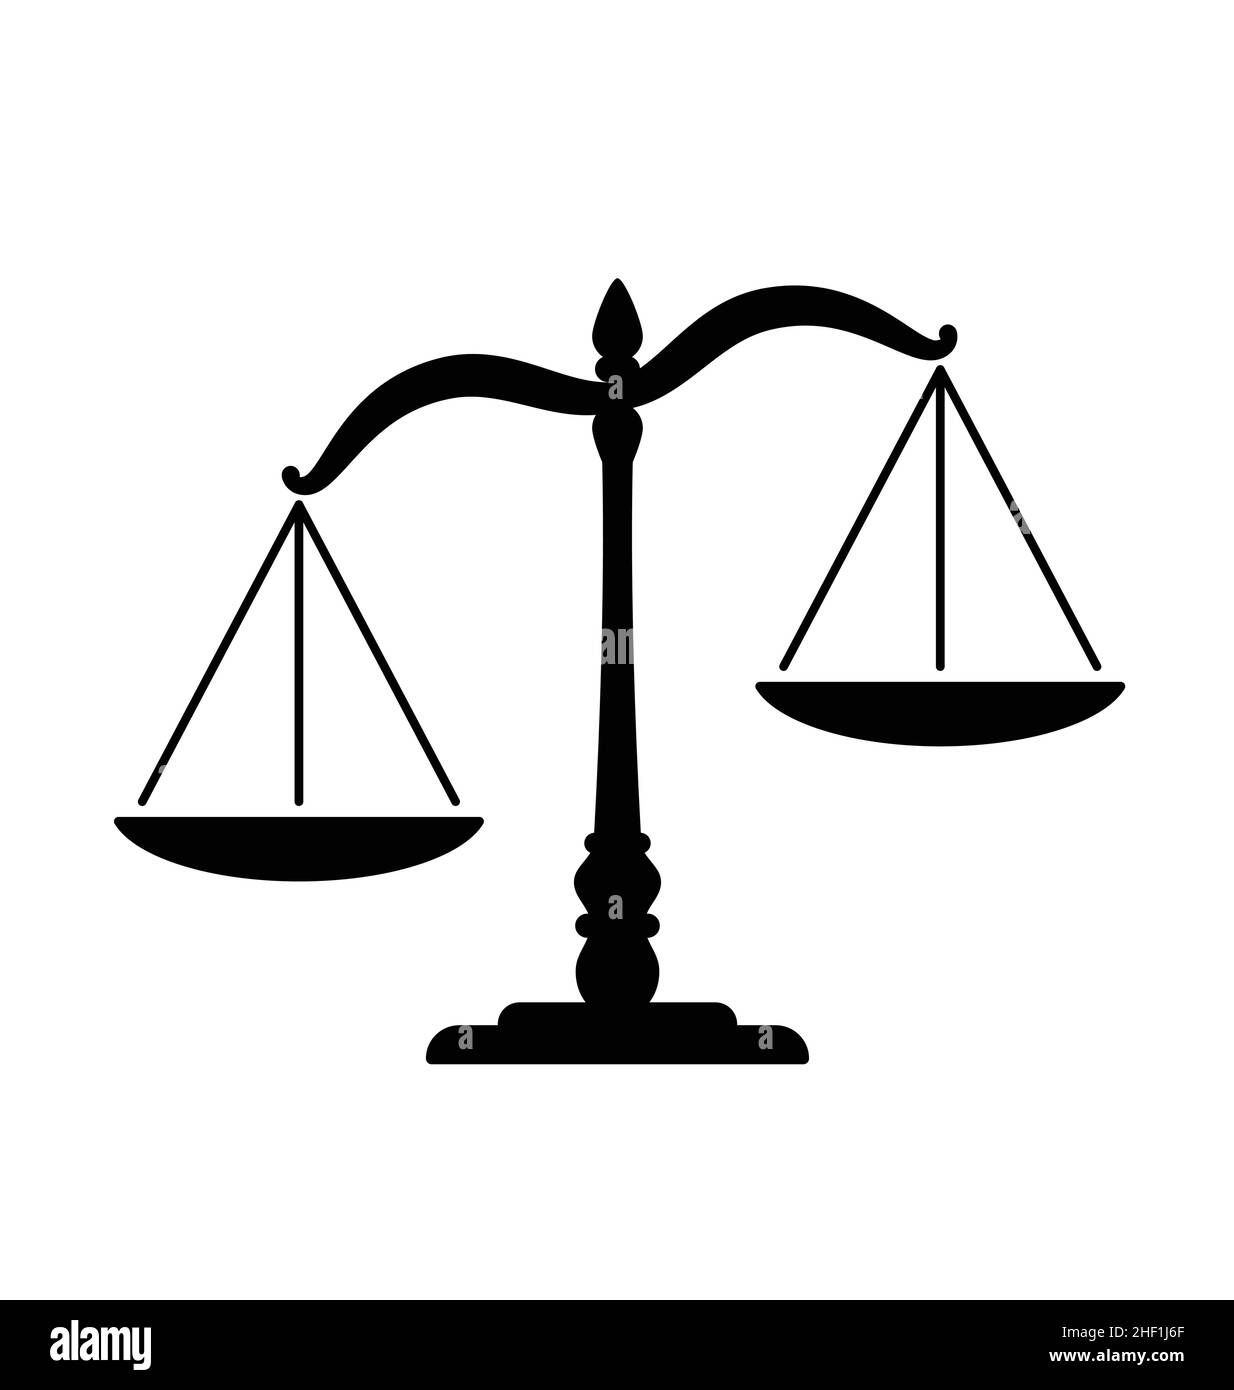 simple classic uneven unbalanced balance justice scales silhouette ...